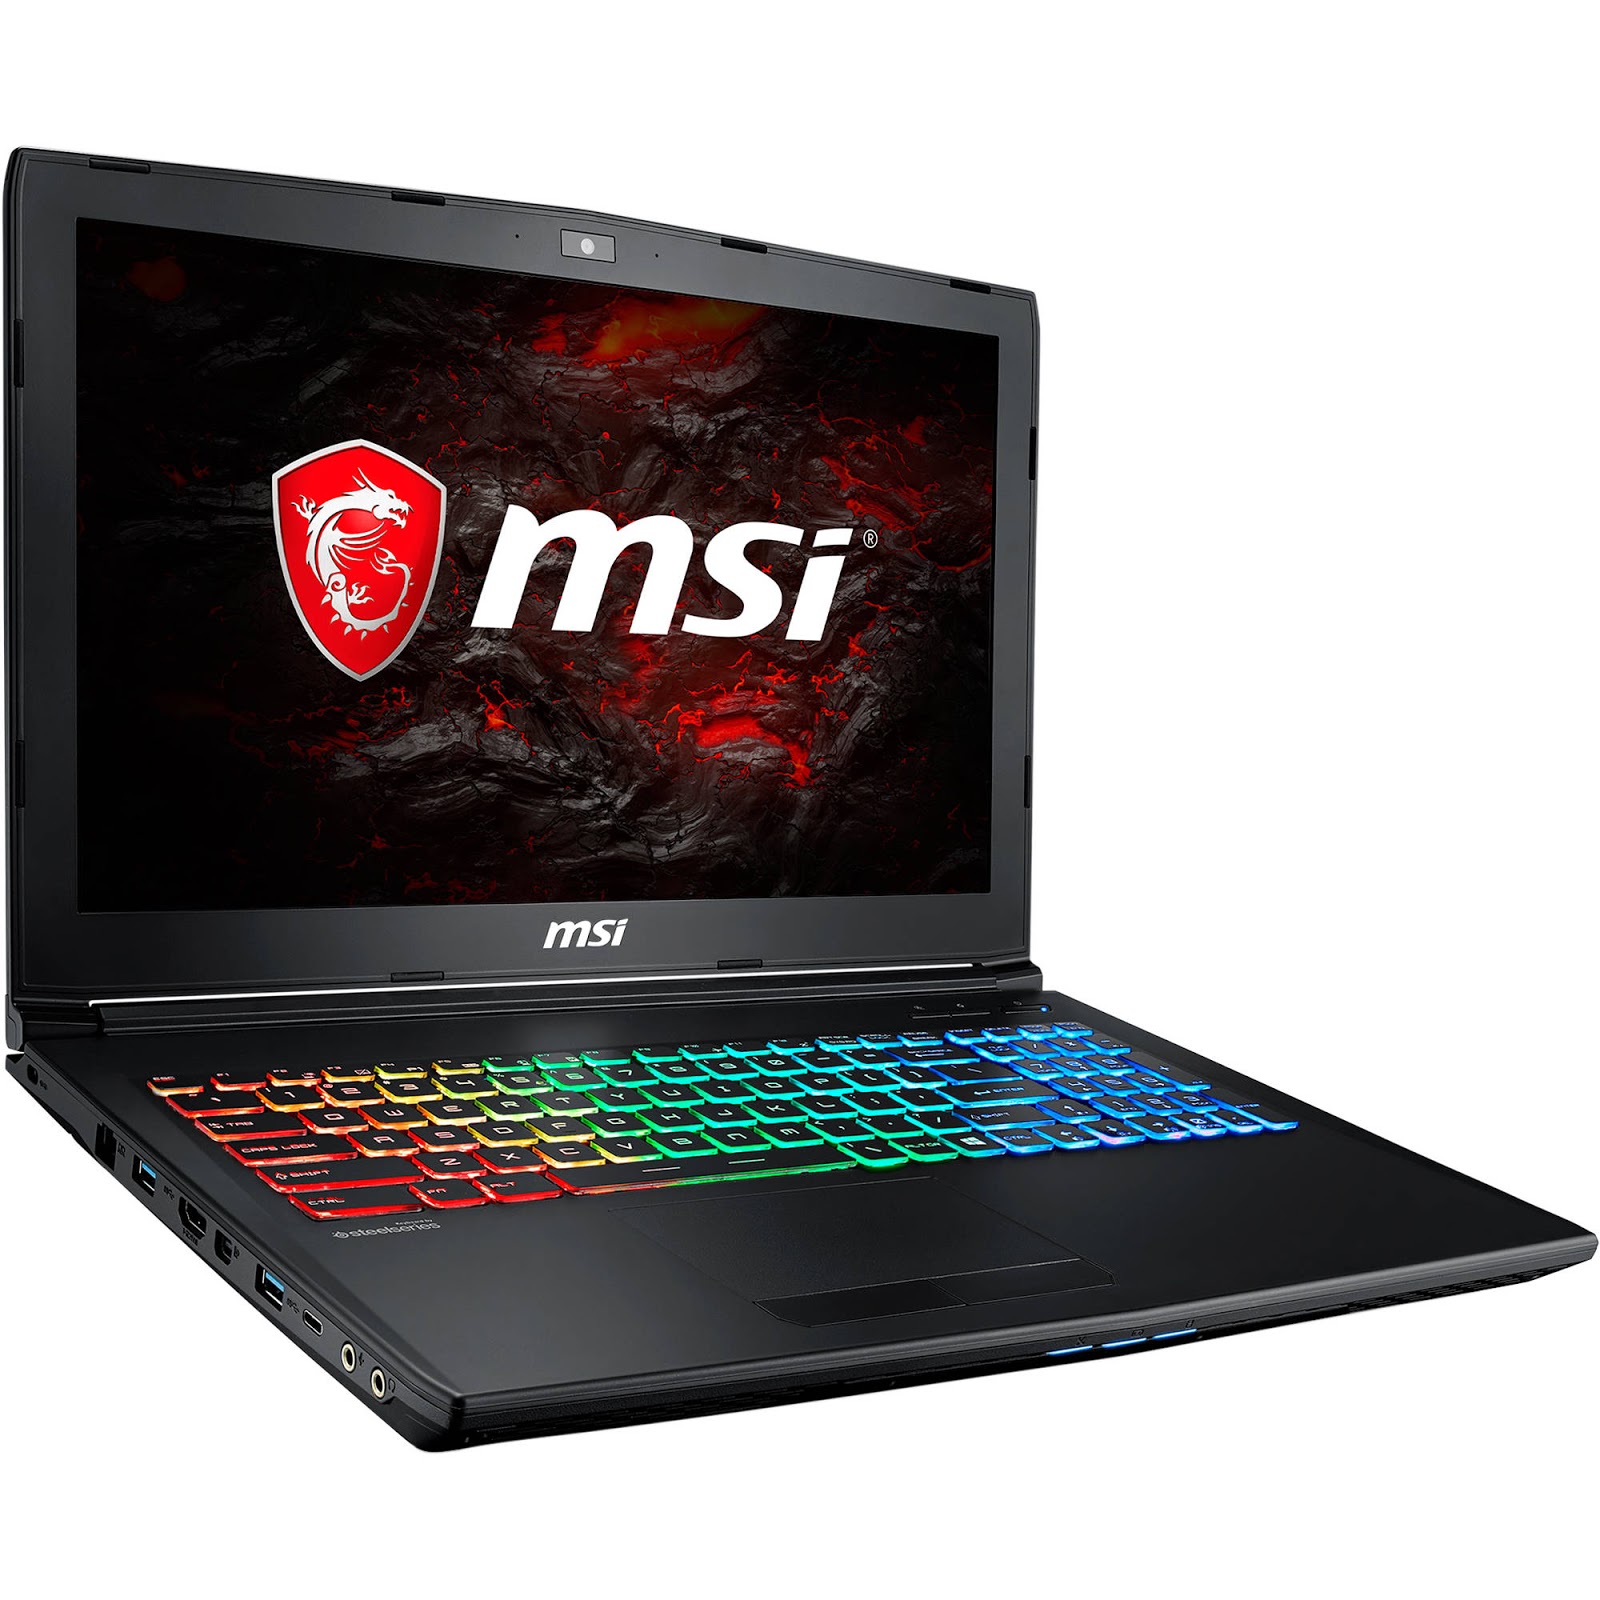 New Gaming Laptop From MSI: The GP62X Leopard Pro - Madd Apple News